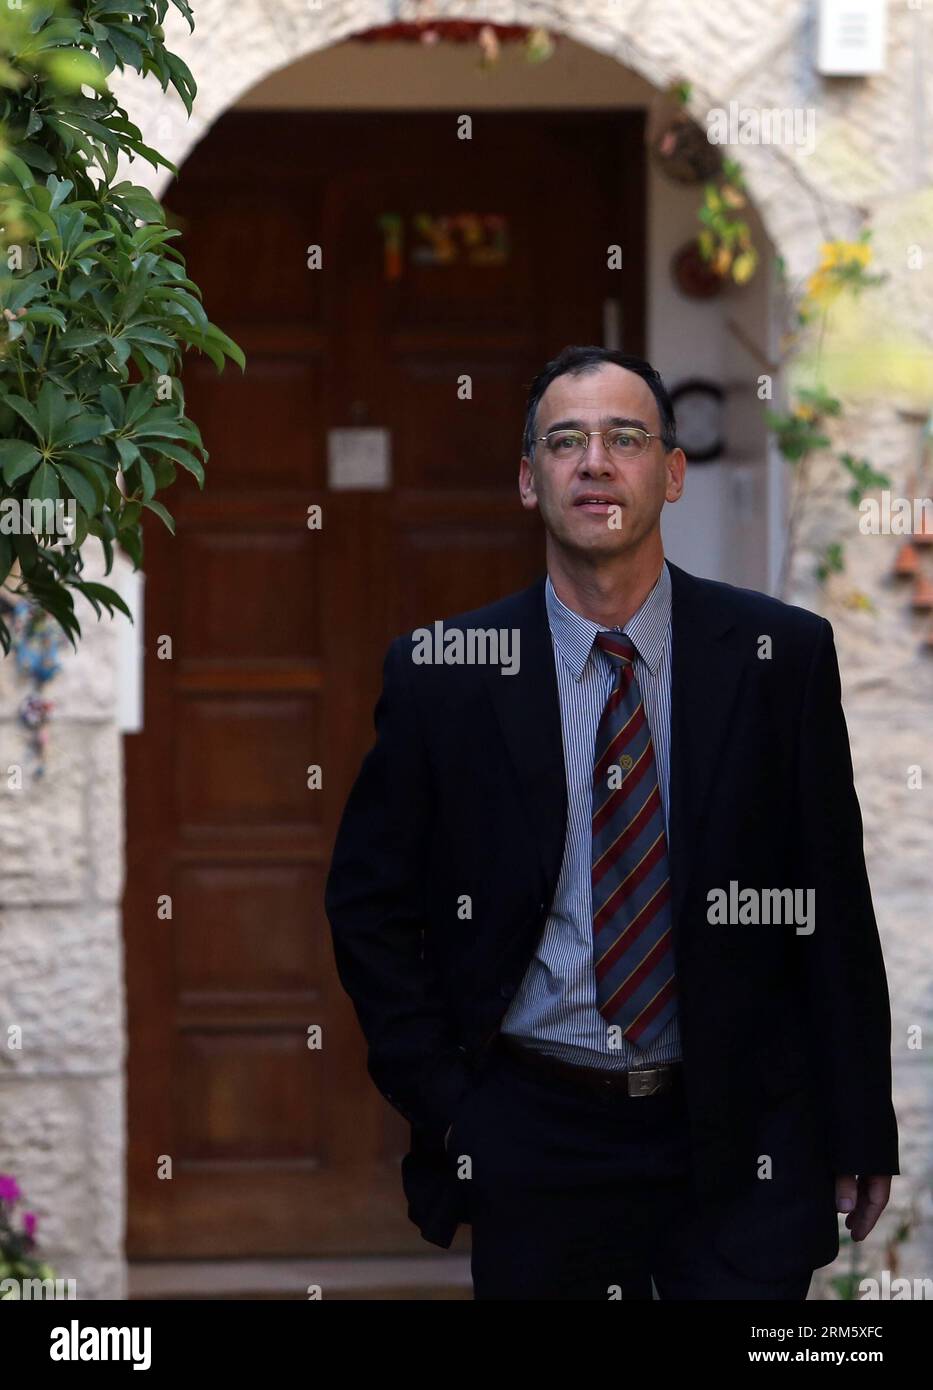 Bildnummer: 60732591  Datum: 19.11.2013  Copyright: imago/Xinhua (131119) -- JERUSALEM, Nov. 19, 2013 (Xinhua) -- Deputy Attorney General Shai Nitzan stands near his home in Jerusalem, on Nov. 19, 2013. A search panel appointed by the Israeli Justice Minister announced on Tuesday that Deputy Attorney General Shai Nitzan was selected as a candidate for the next state prosecutor, according to a statement released by the ministry. Nitzan, 54, was nominated alone with three other candidates. He told the Ynet news website that it is a great honor to be selected for the post. (Xinhua/JINI) MIDEAST-J Stock Photo